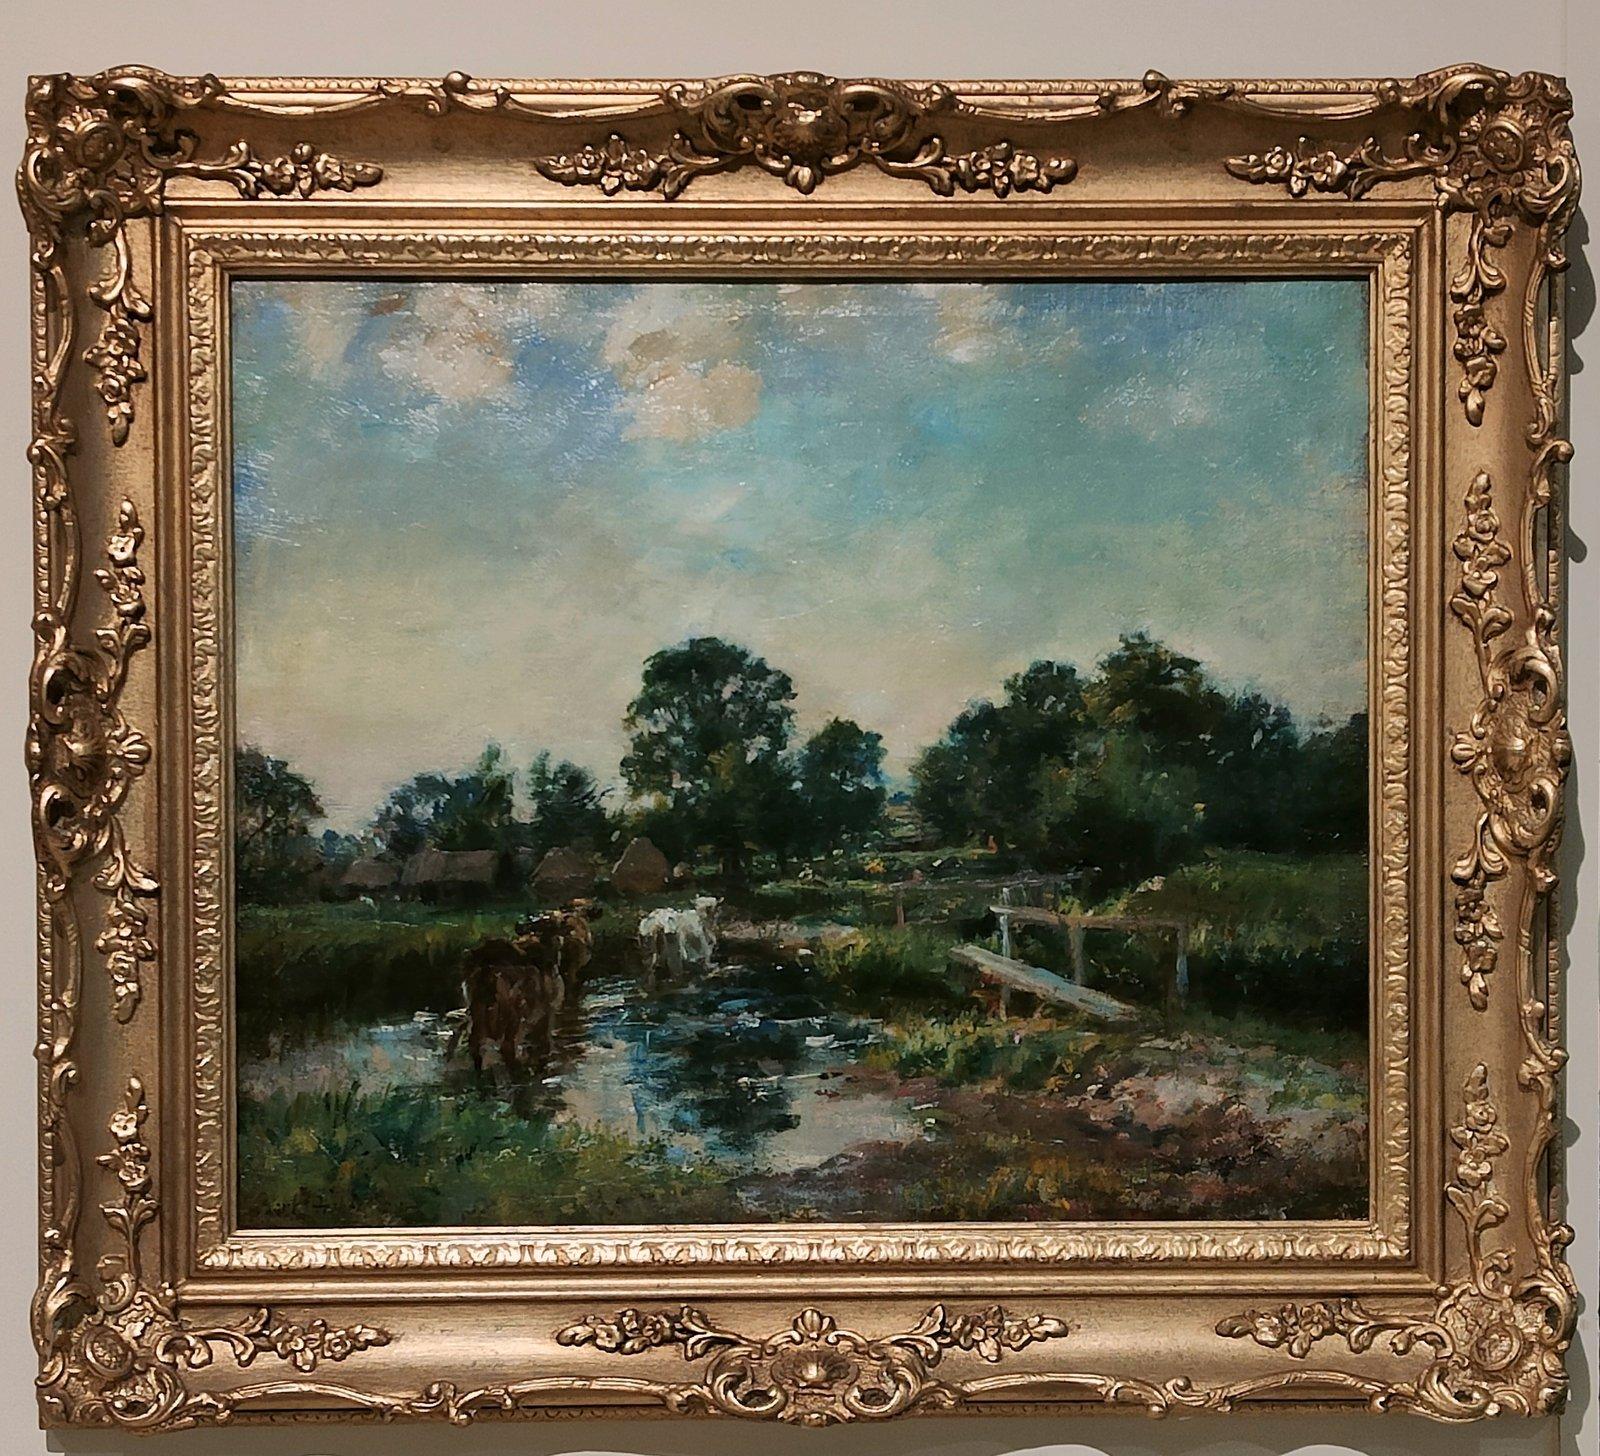 Oil Painting by William Mark Fisher "Cattle by a Stream" 1841 -1923 Born in Boston U.S studying under George Innes. Travelled to Paris then London in 1872 where he settled member of the Royal Academy. Oil on canvas. Signed.

Dimensions